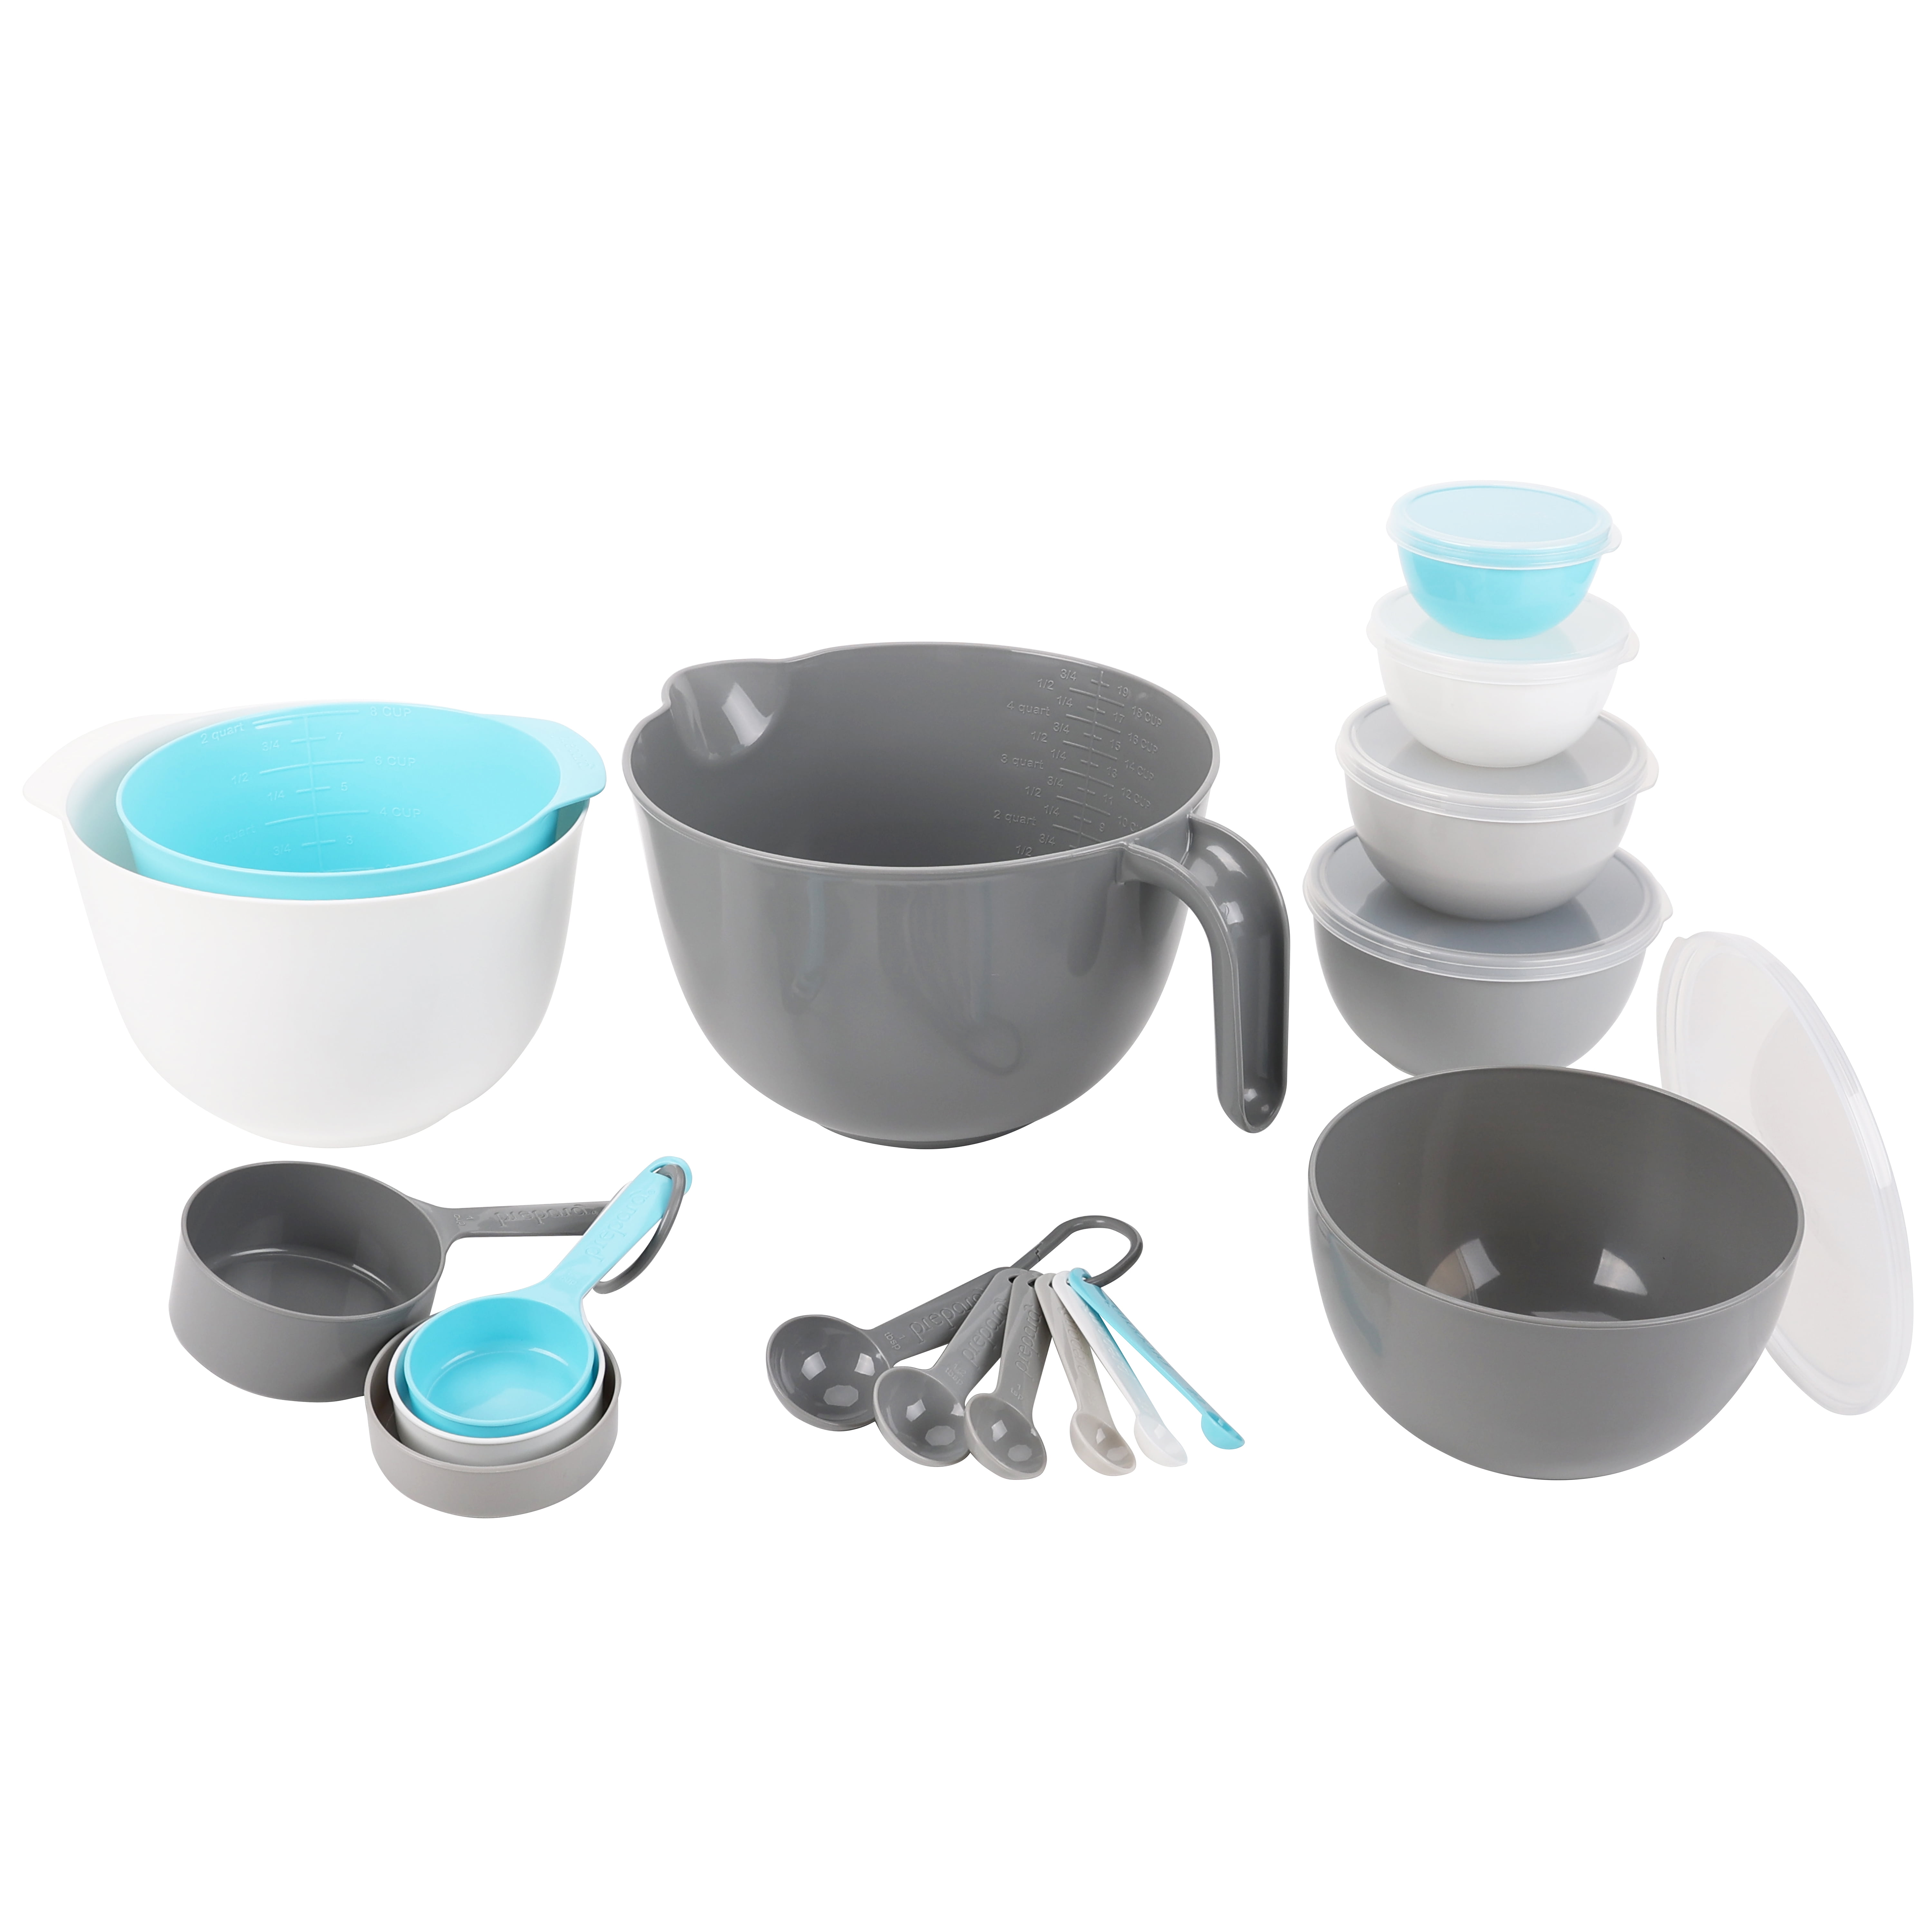 Prepara Mixing Bowl Set, 23 Pieces with Lids, Measuring Cups and Spoons, Gray